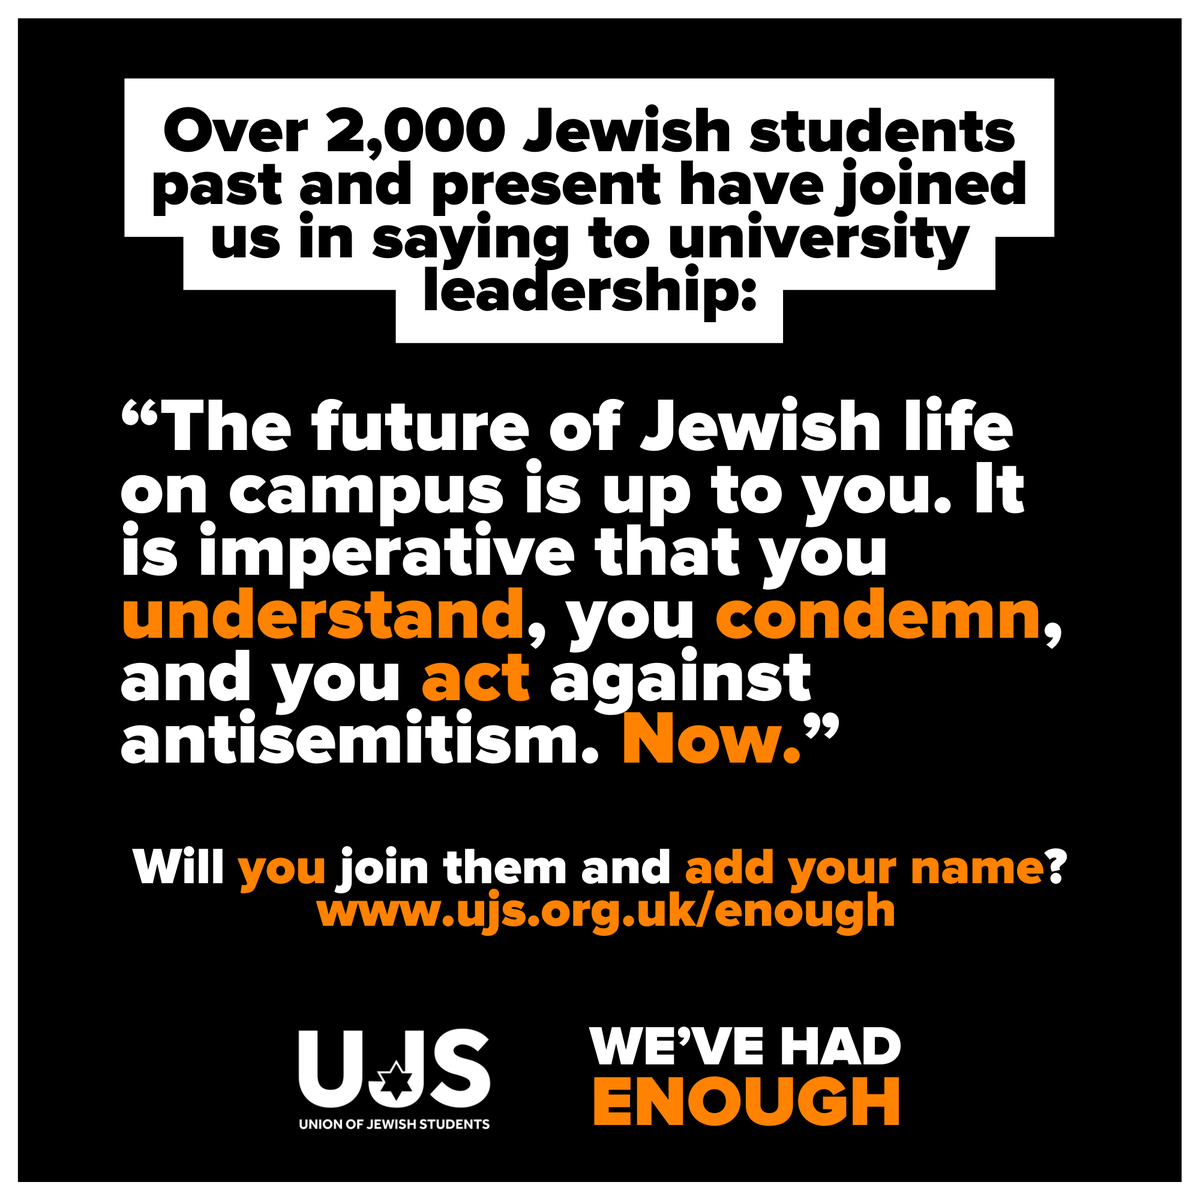 Will you join over 2,000 Jewish students past and present in saying ‘We’ve Had Enough’? 🔗 SIGN NOW: ujs.org.uk/enough